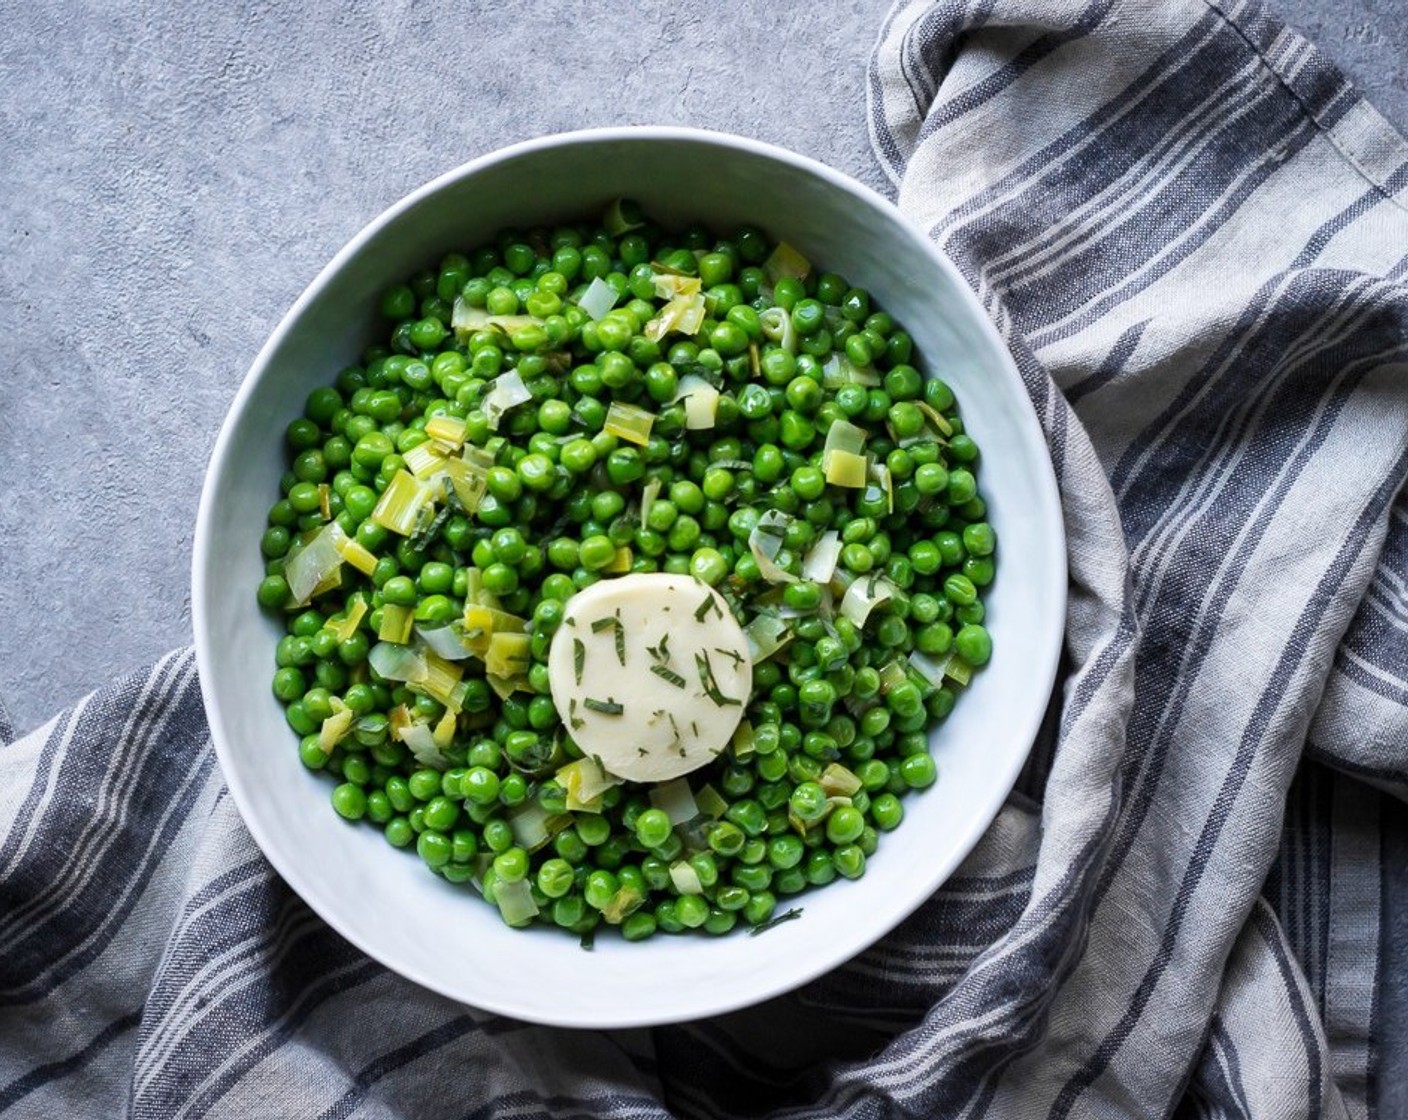 step 7 To serve, place buttered peas and leeks in a serving bowl and top with remaining 1 tablespoon of Butter (1 Tbsp) and Fresh Mint (1 Tbsp).